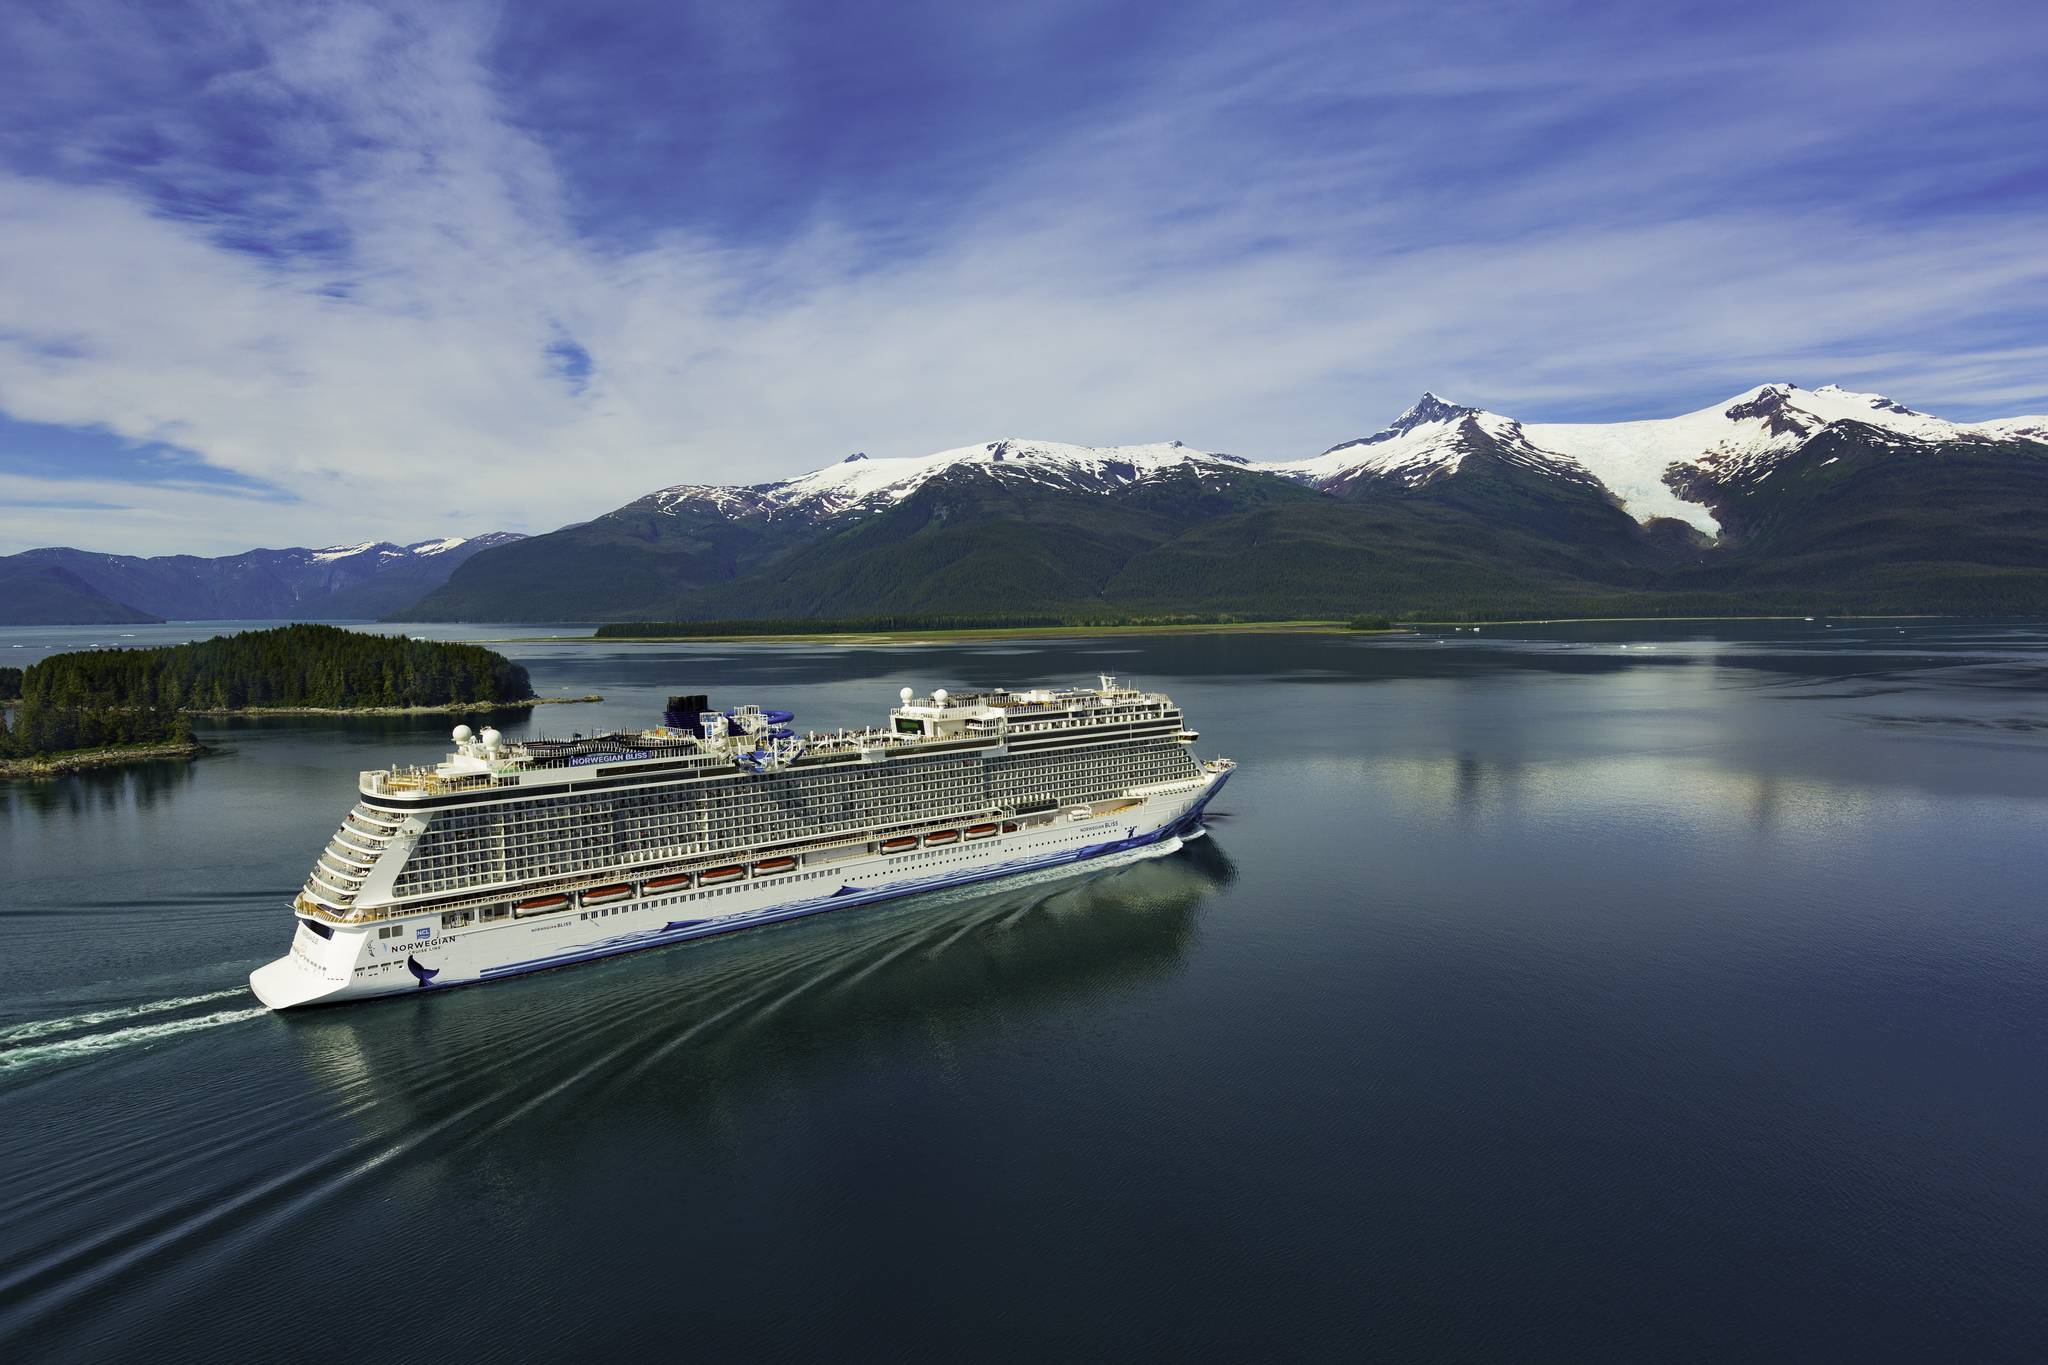 Large cruises ships like Norwegian Cruise Line's Norwegian Bliss, seen here near Ketchikan in this undated photo, are returning to Alaska after being shutdown due to COVID-19. Trade group Cruise Lines International Association says the industry is ready to get back to business safely. (Courtesy photo / Norwegian Cruise Line)